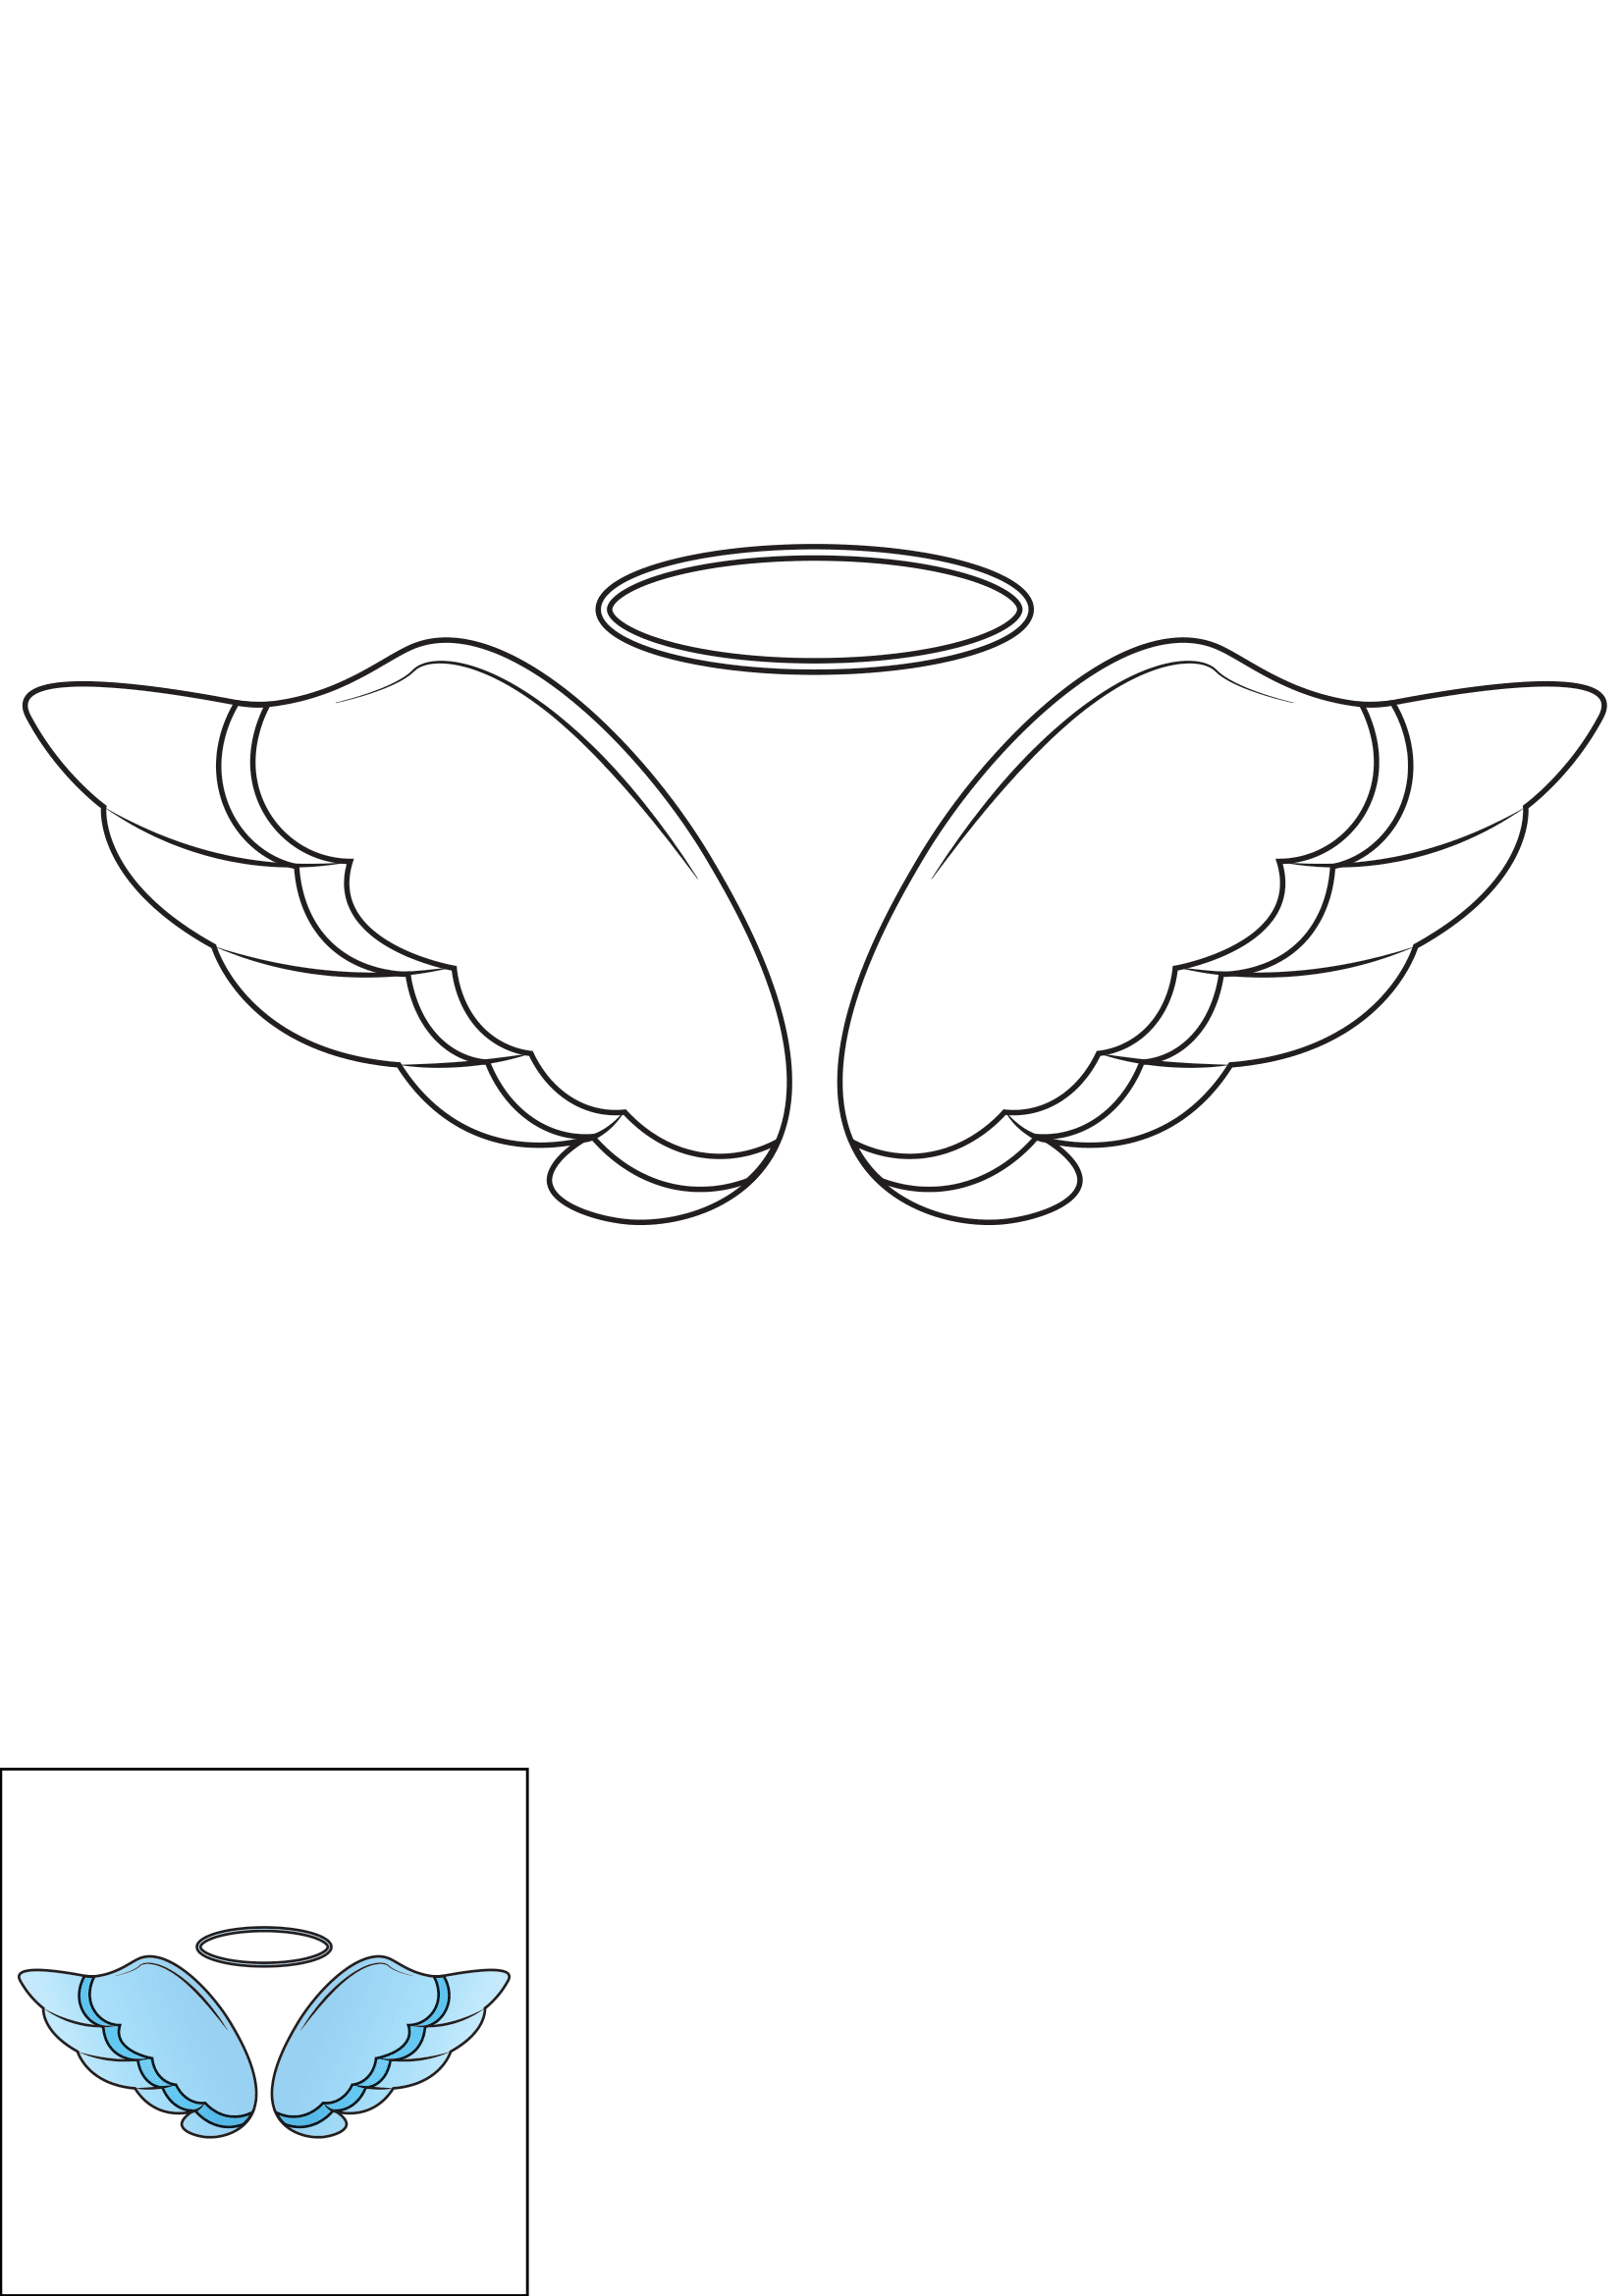 How to Draw An Angel's Wings Step by Step Printable Color